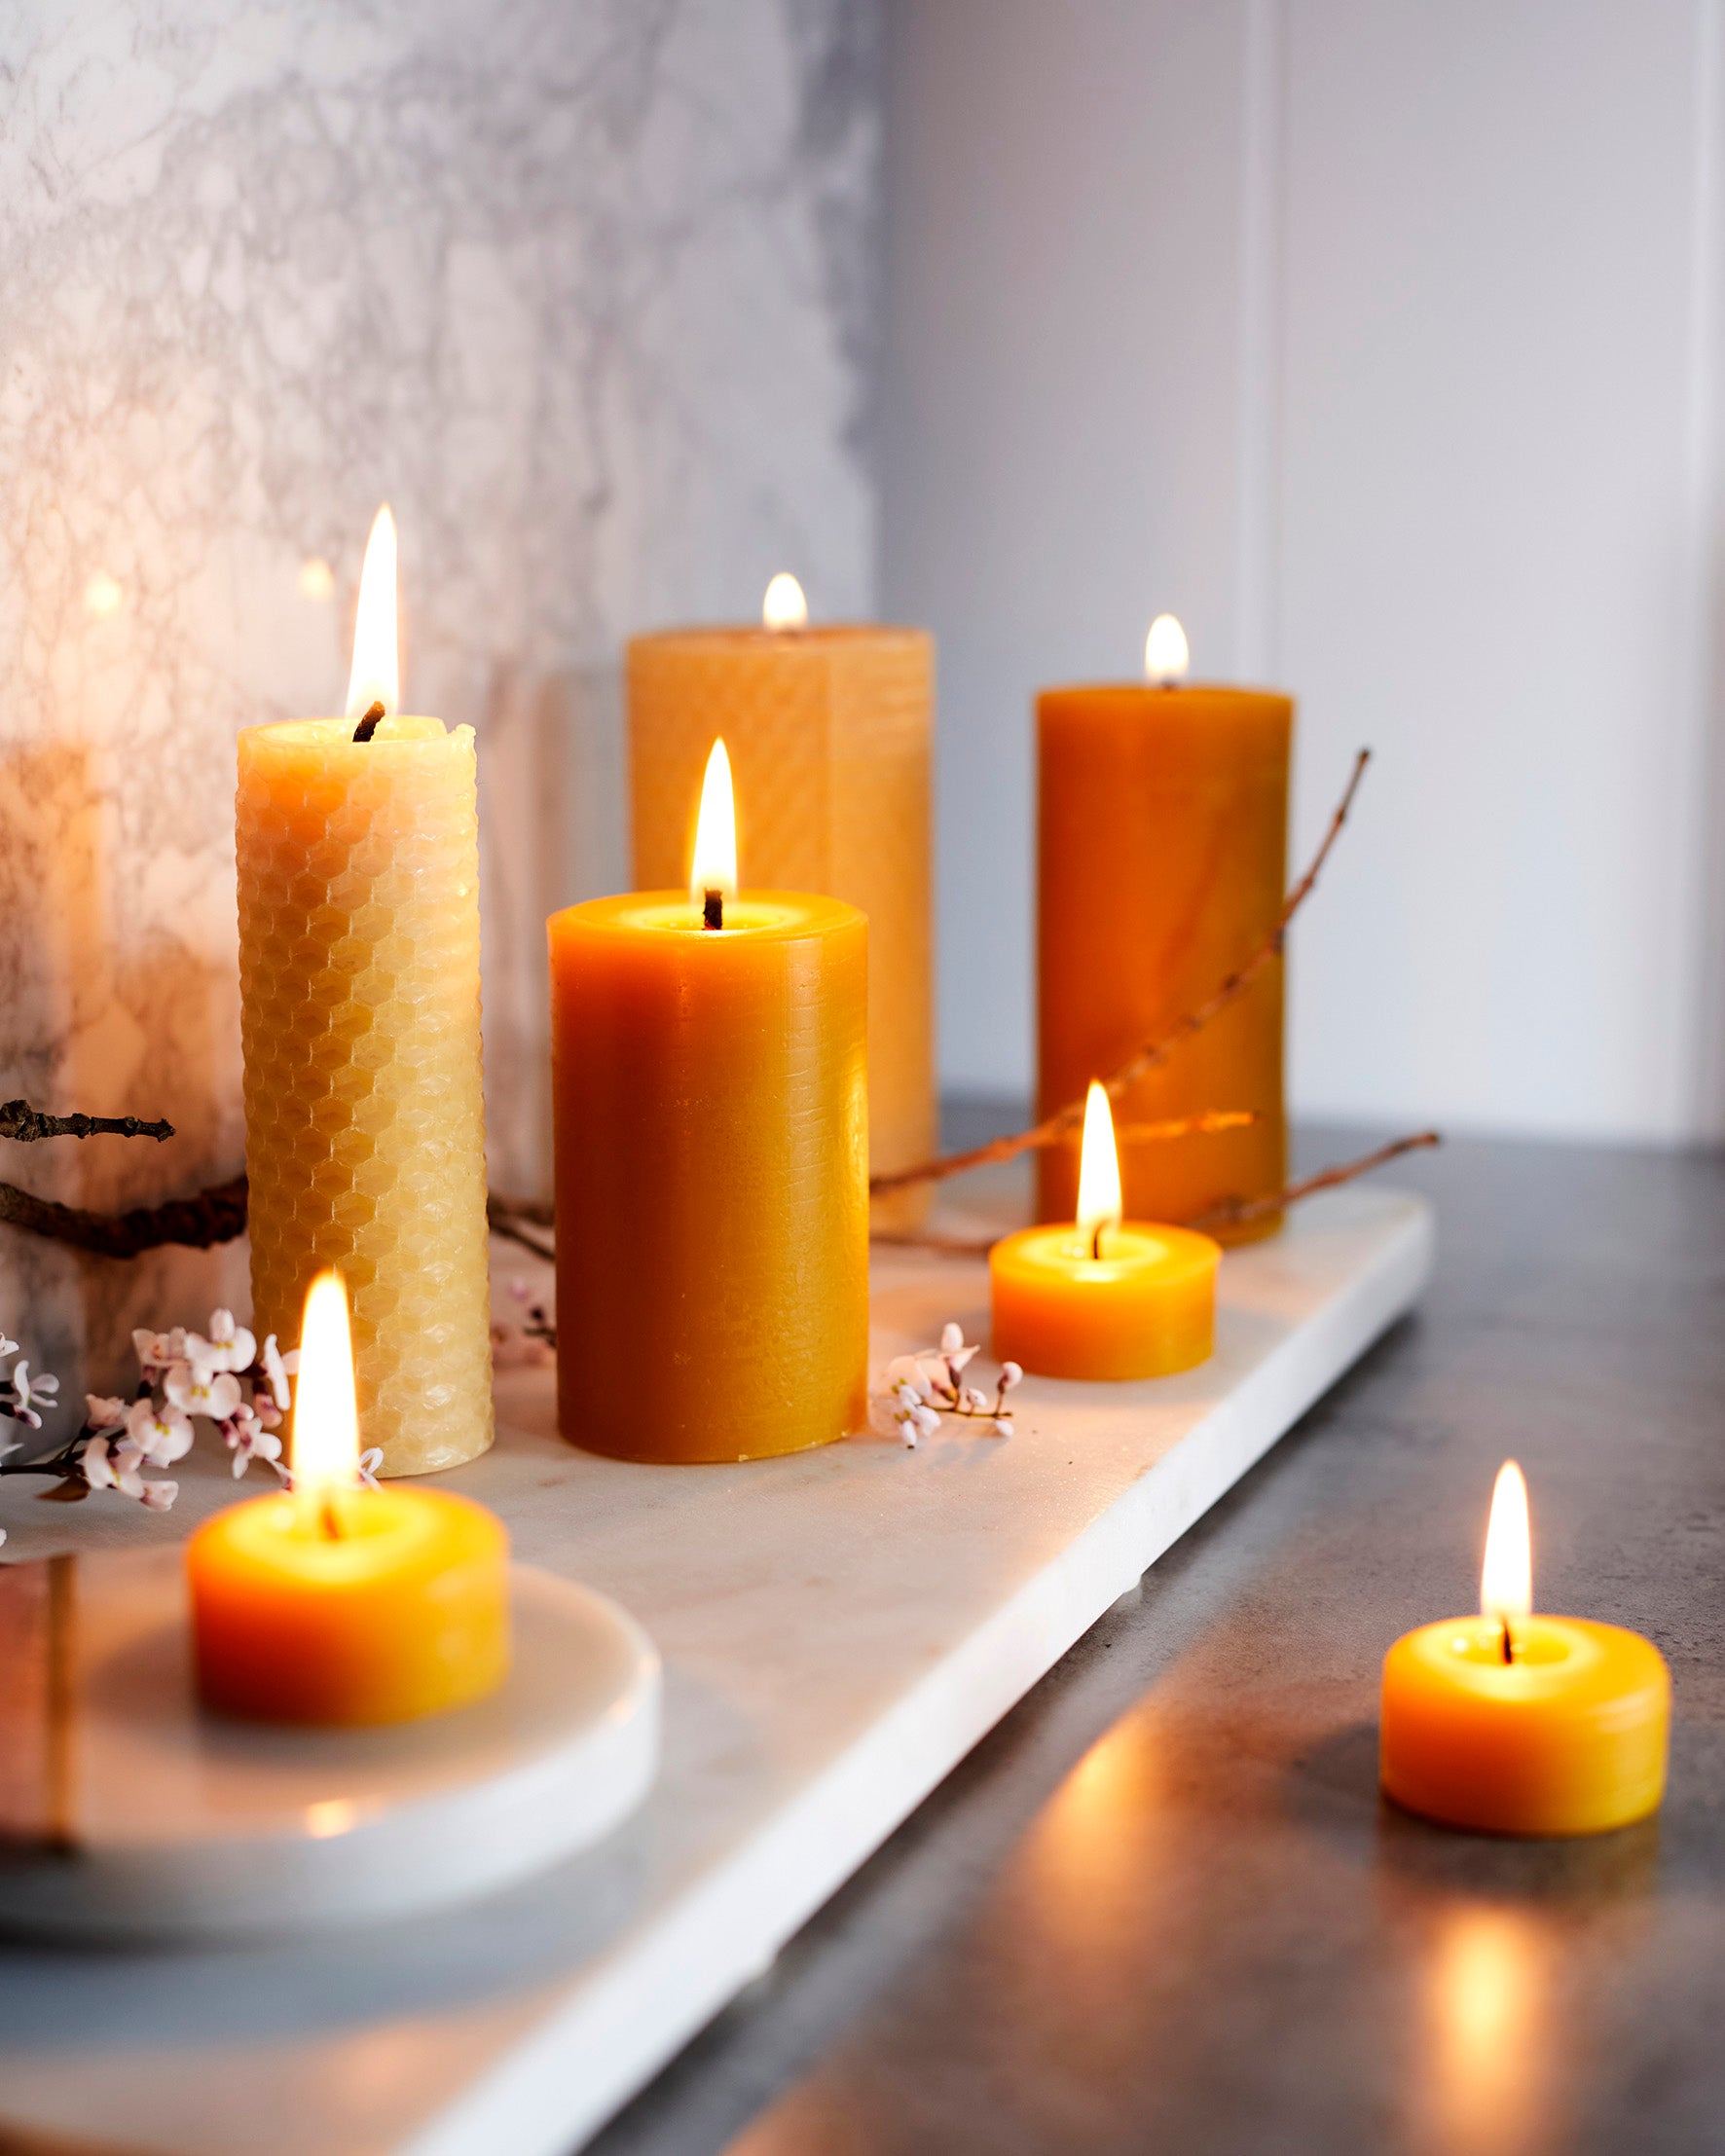 Why Beeswax Candles vs. Other Wax Candles? – Hexton Bee Company